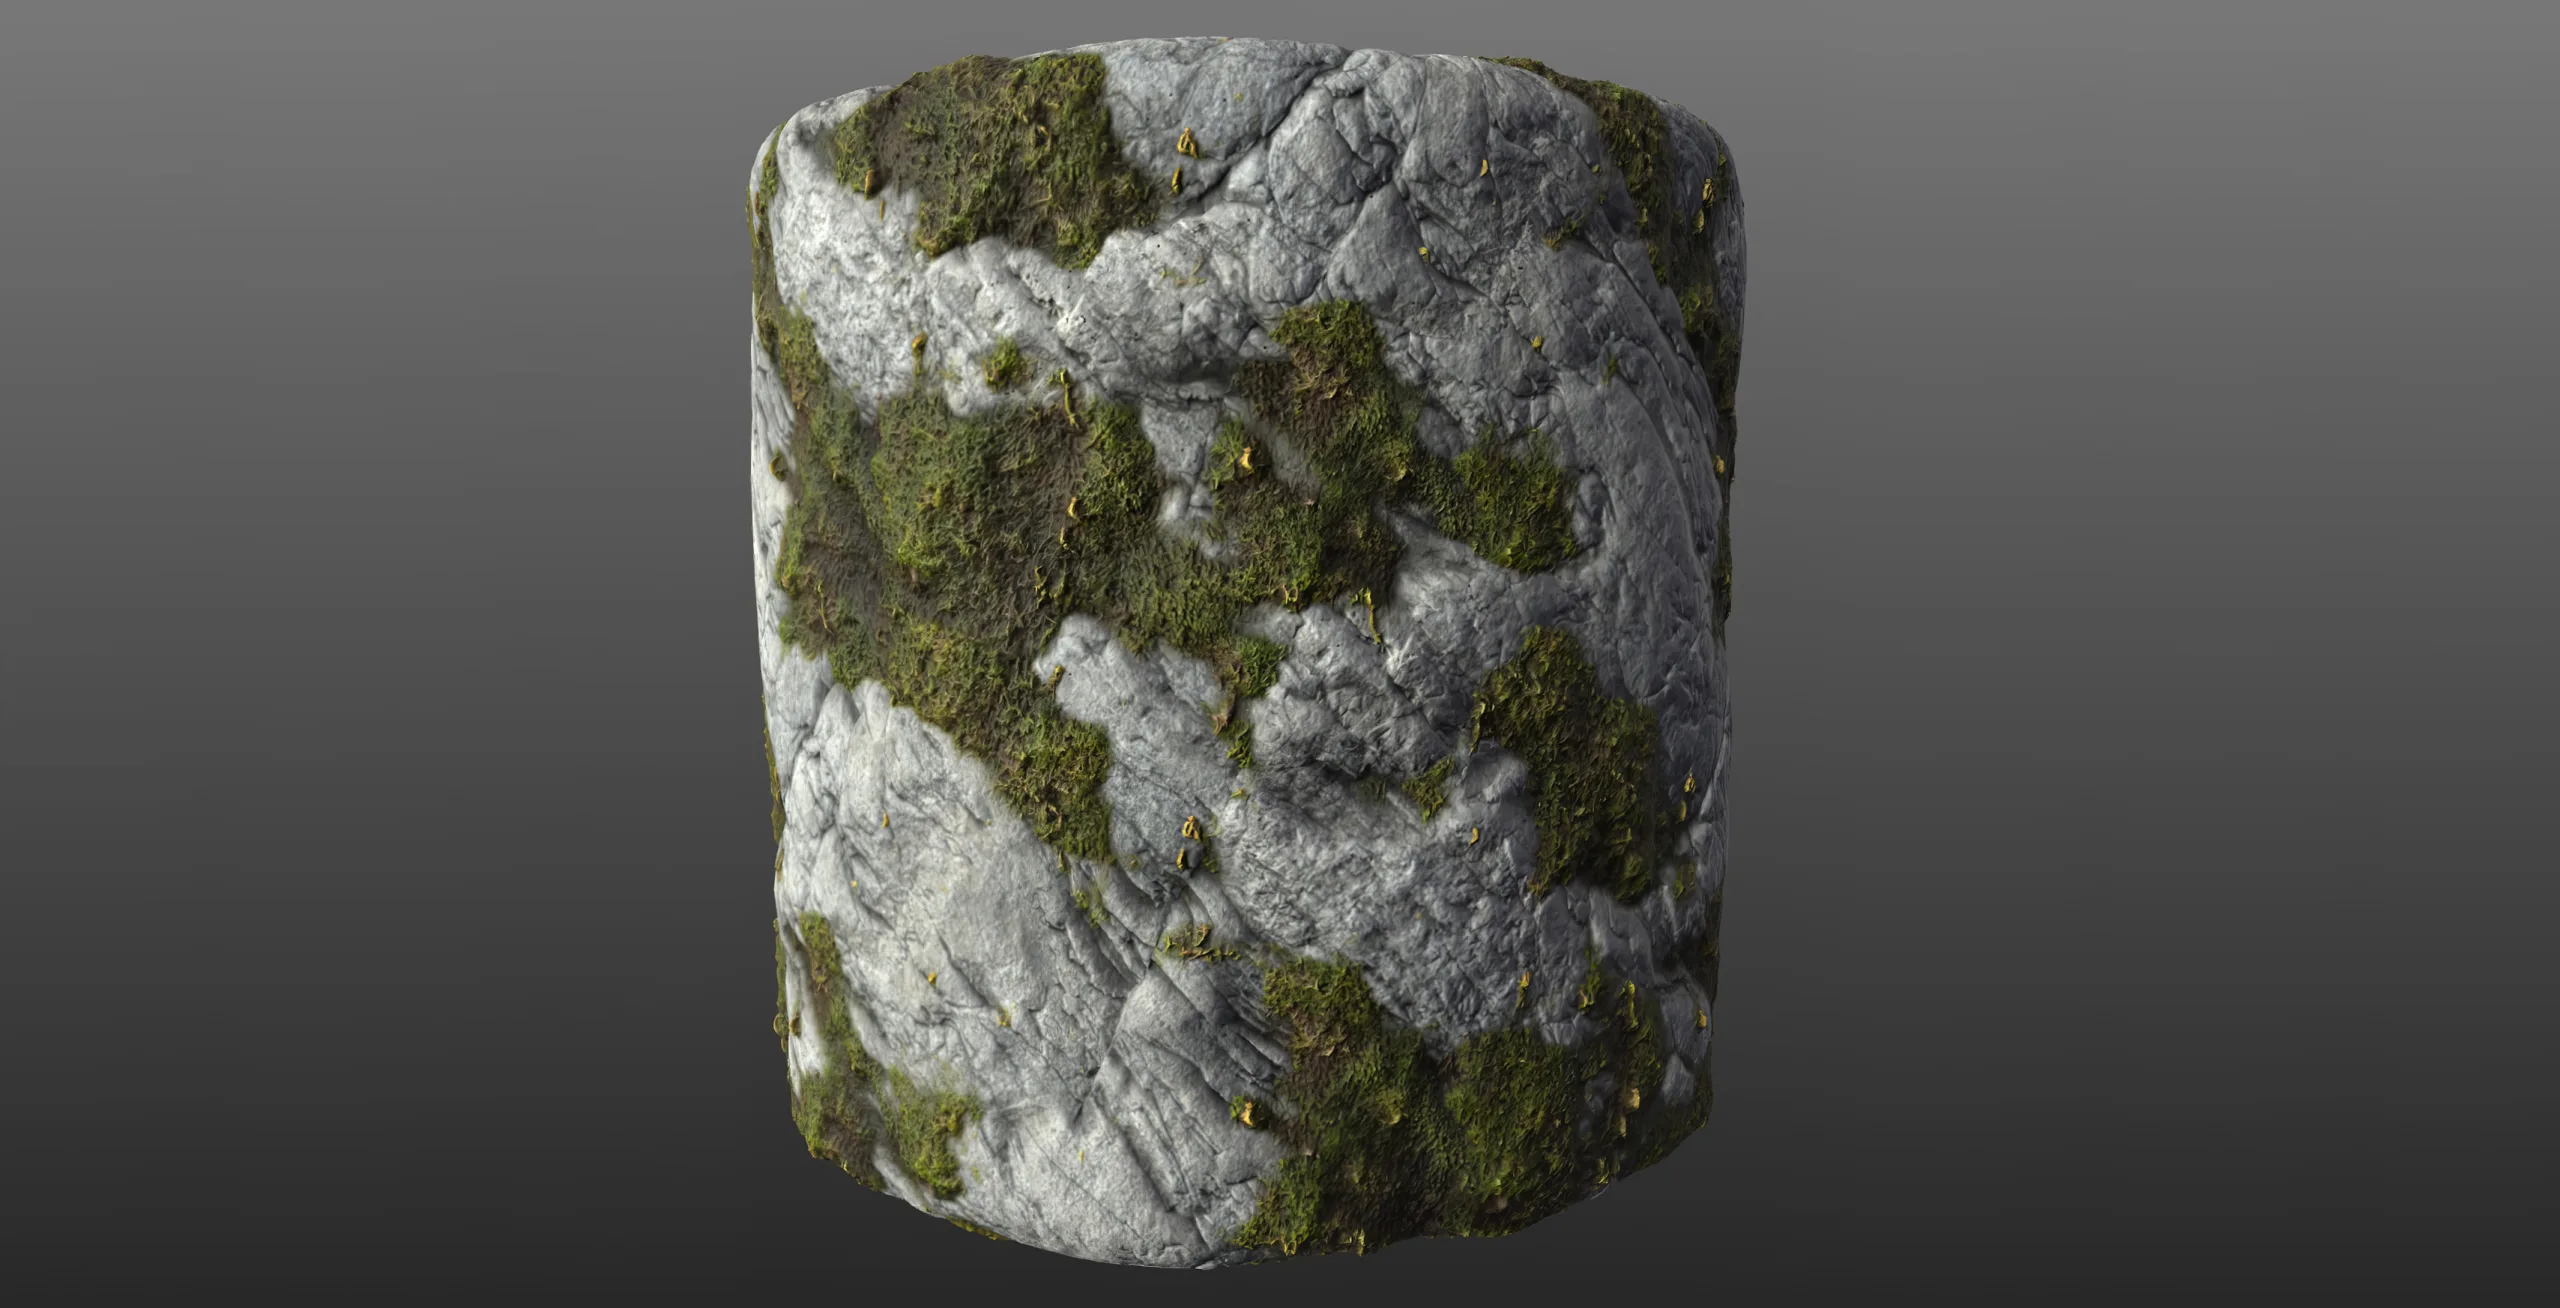 Mossy Rock 02 - PBR Material Texture